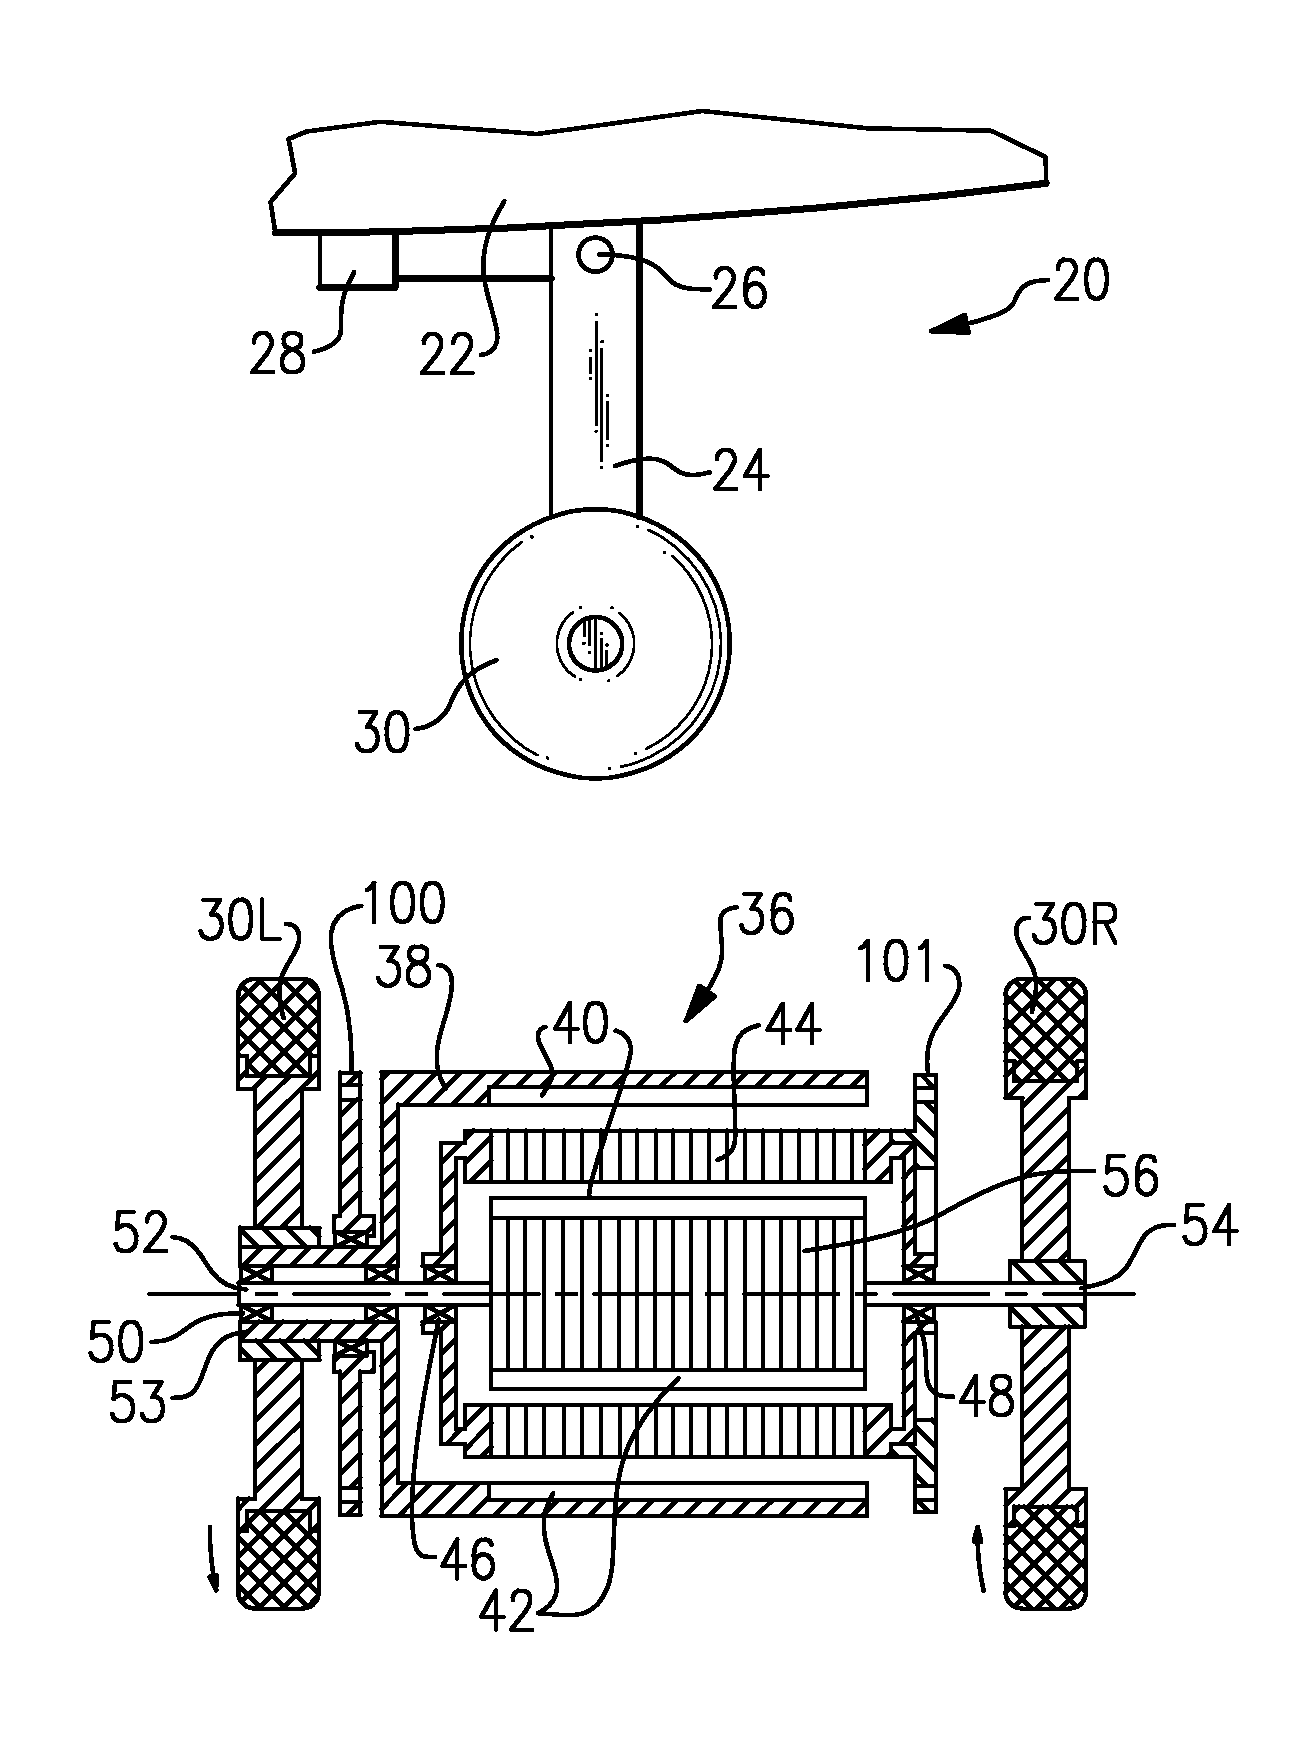 Transverse flux machine utilized as part of a combined landing gear system